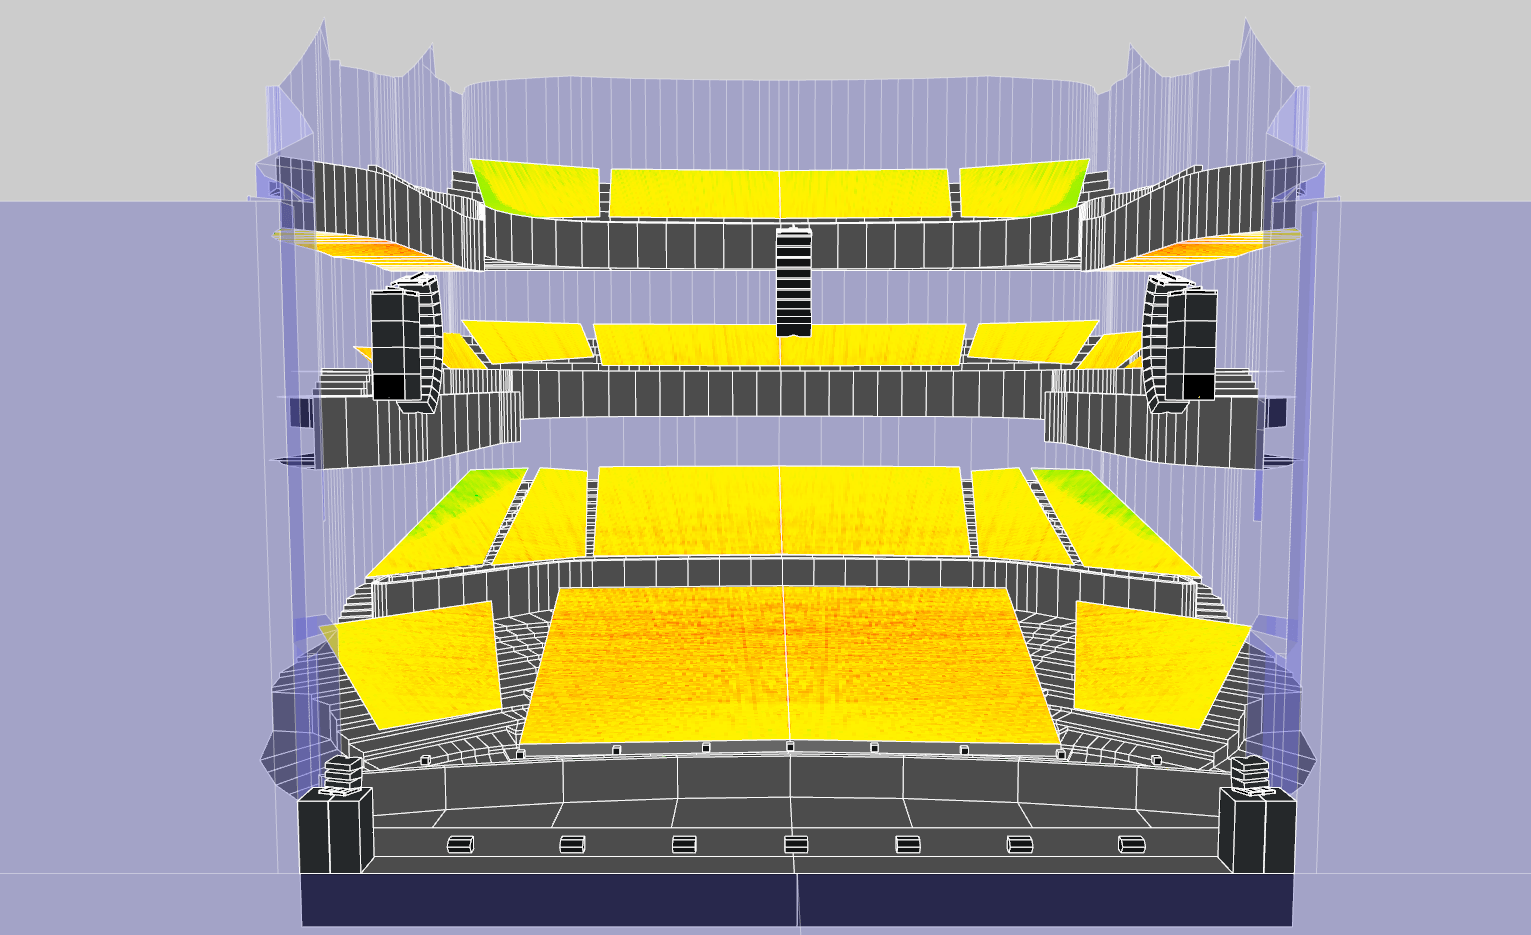 3D Model of sound system set up by L-Acoustics at the Shaanxi Grand Theater, China